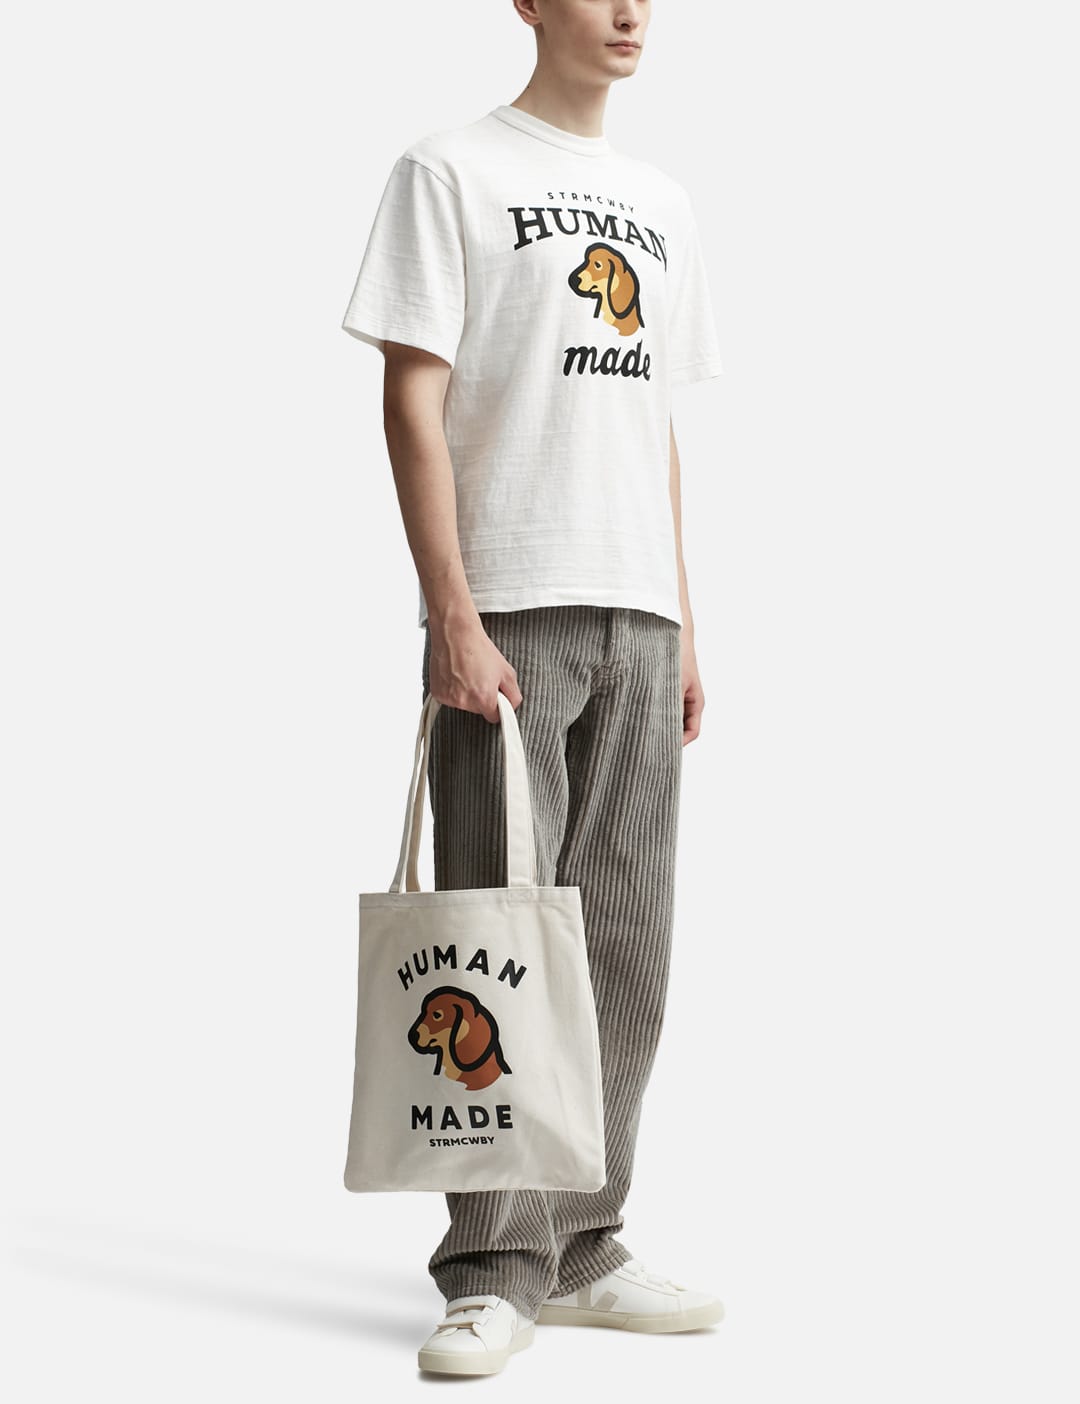 Human Made - Graphic T-shirt #6 | HBX - Globally Curated Fashion